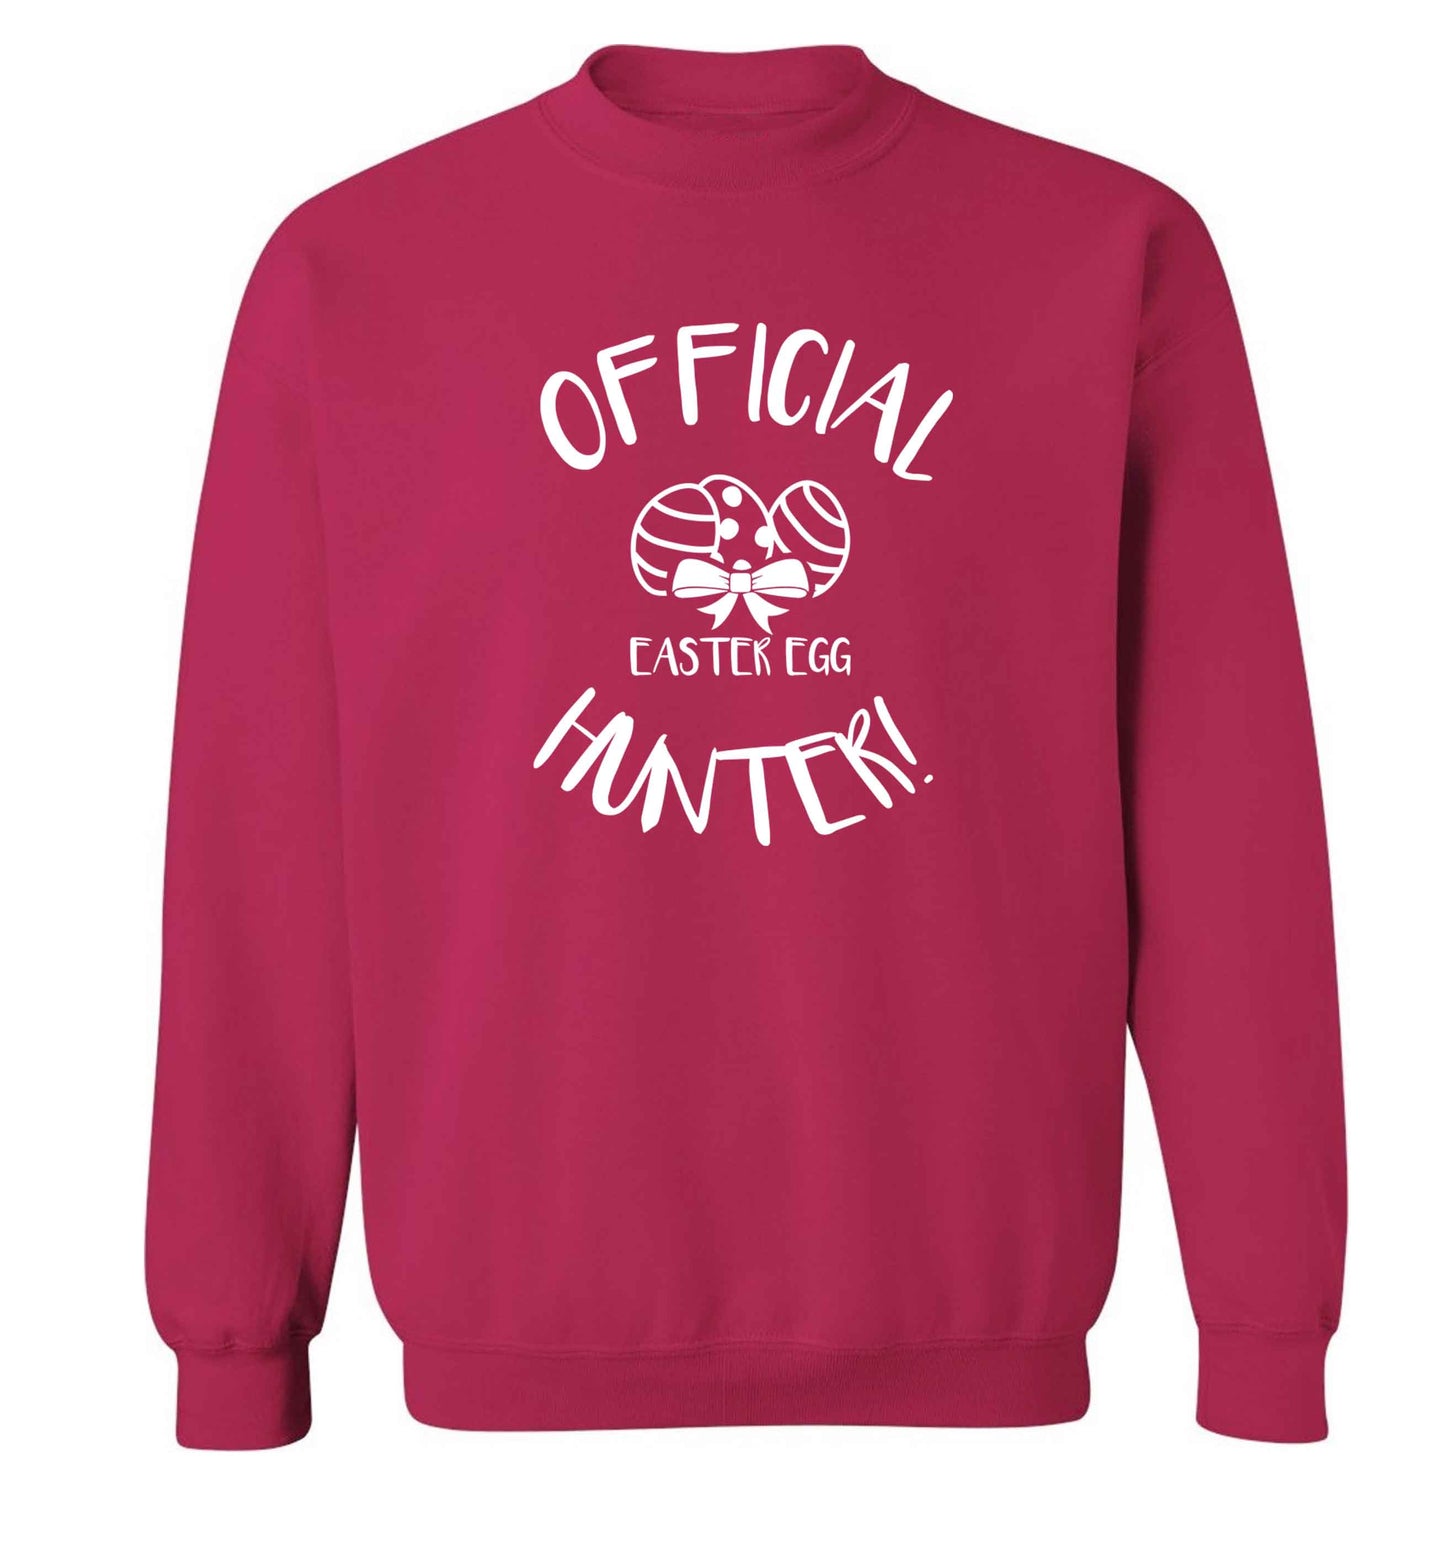 Official Easter egg hunter! adult's unisex pink sweater 2XL